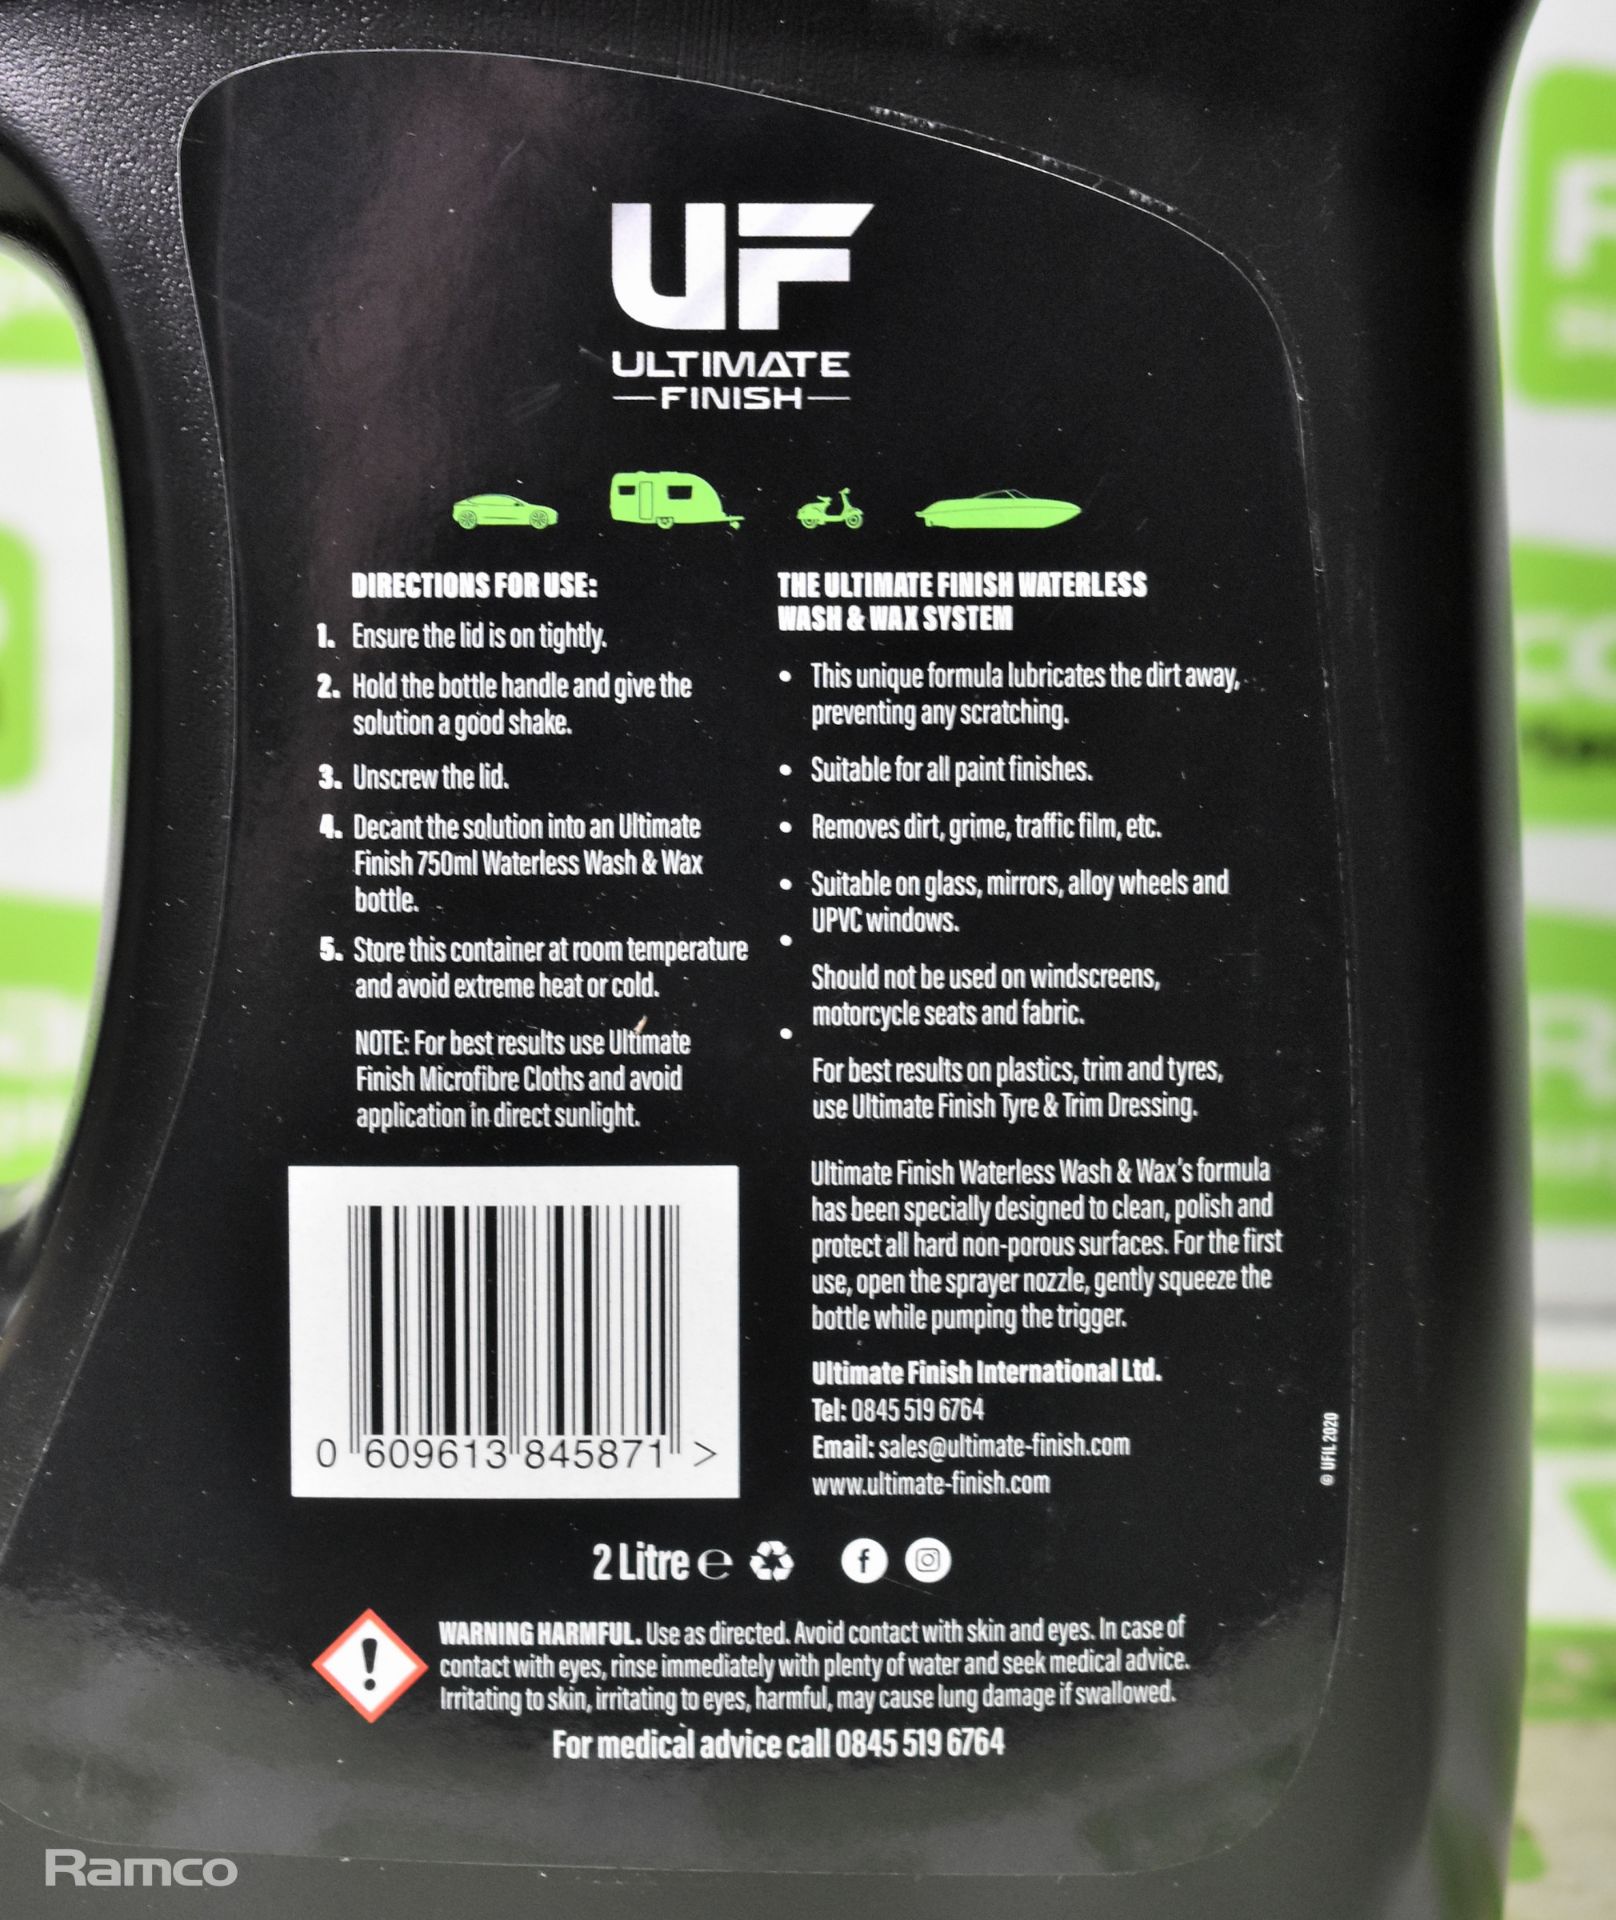 60x Ultimate Finish waterless wash and wax - 2000ml refill bottles - Image 4 of 4